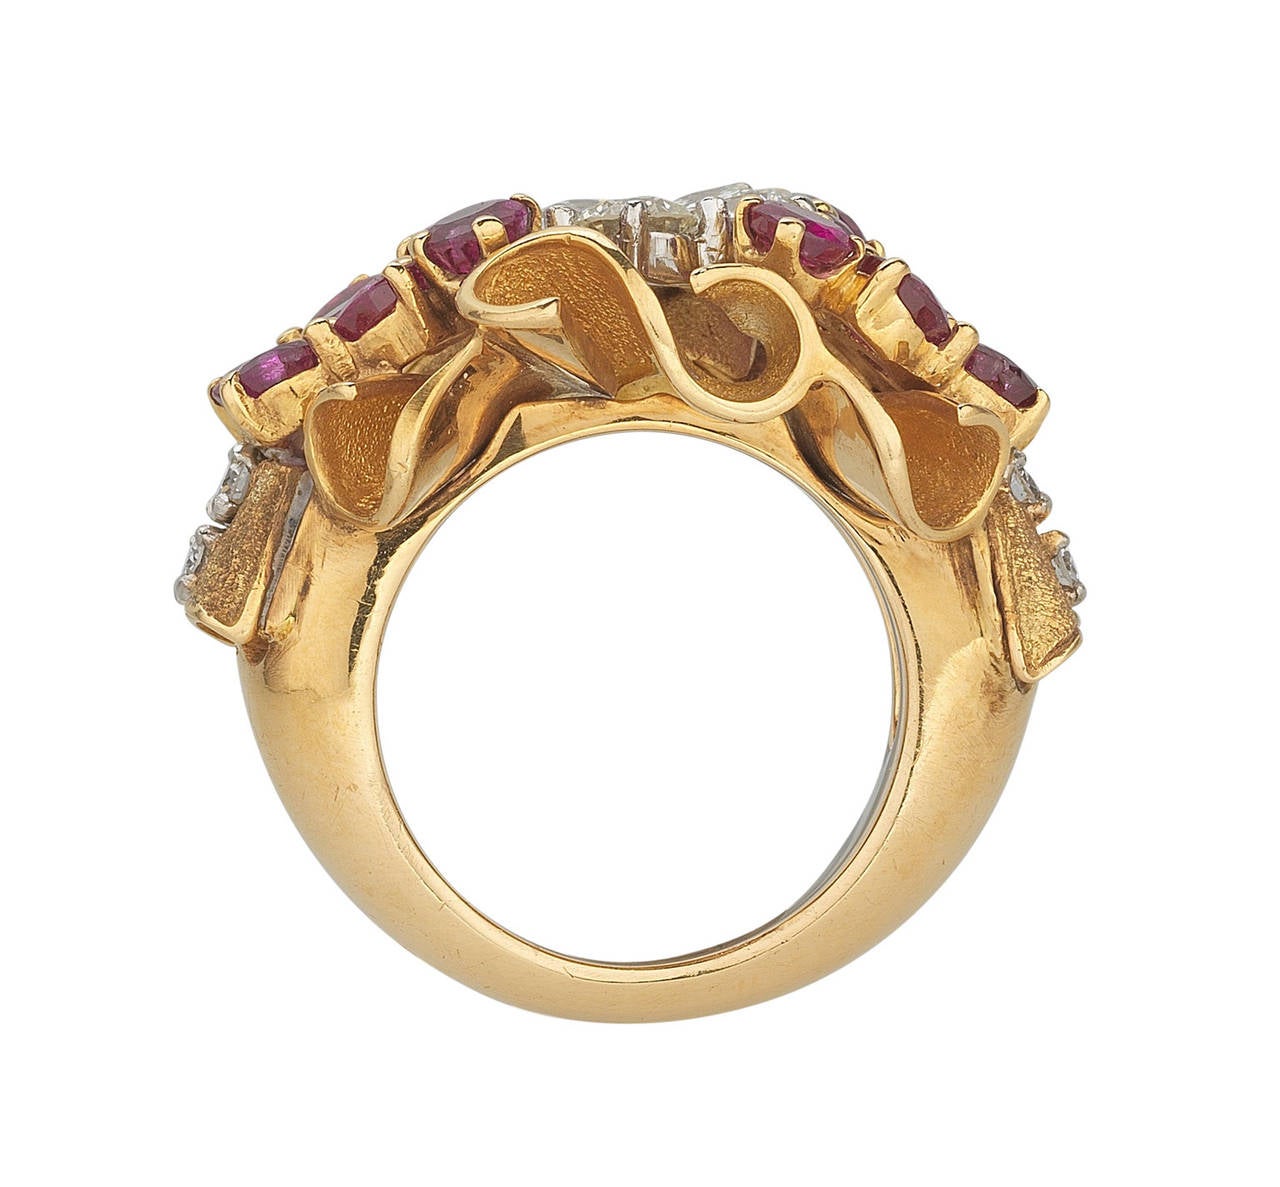 Retro Yellow gold (18kt) and Platinum Diamond and Ruby ring.
French marks. Circa 1940.

Total weight of the ring: 17.5 grams